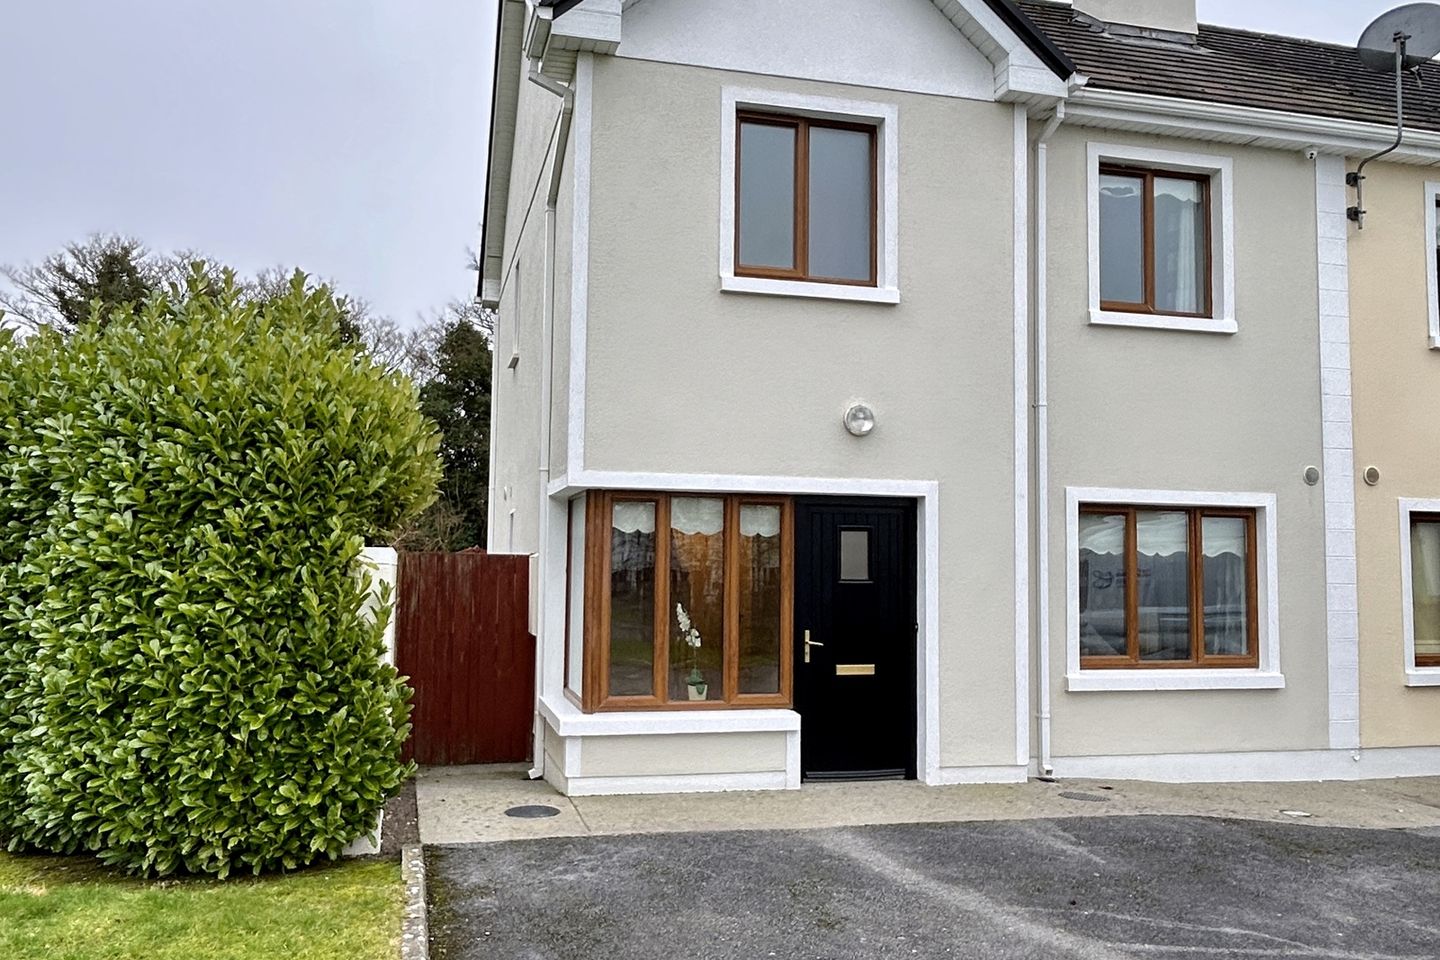 25 The Orchard, Moylough, Co. Galway, H53DK19